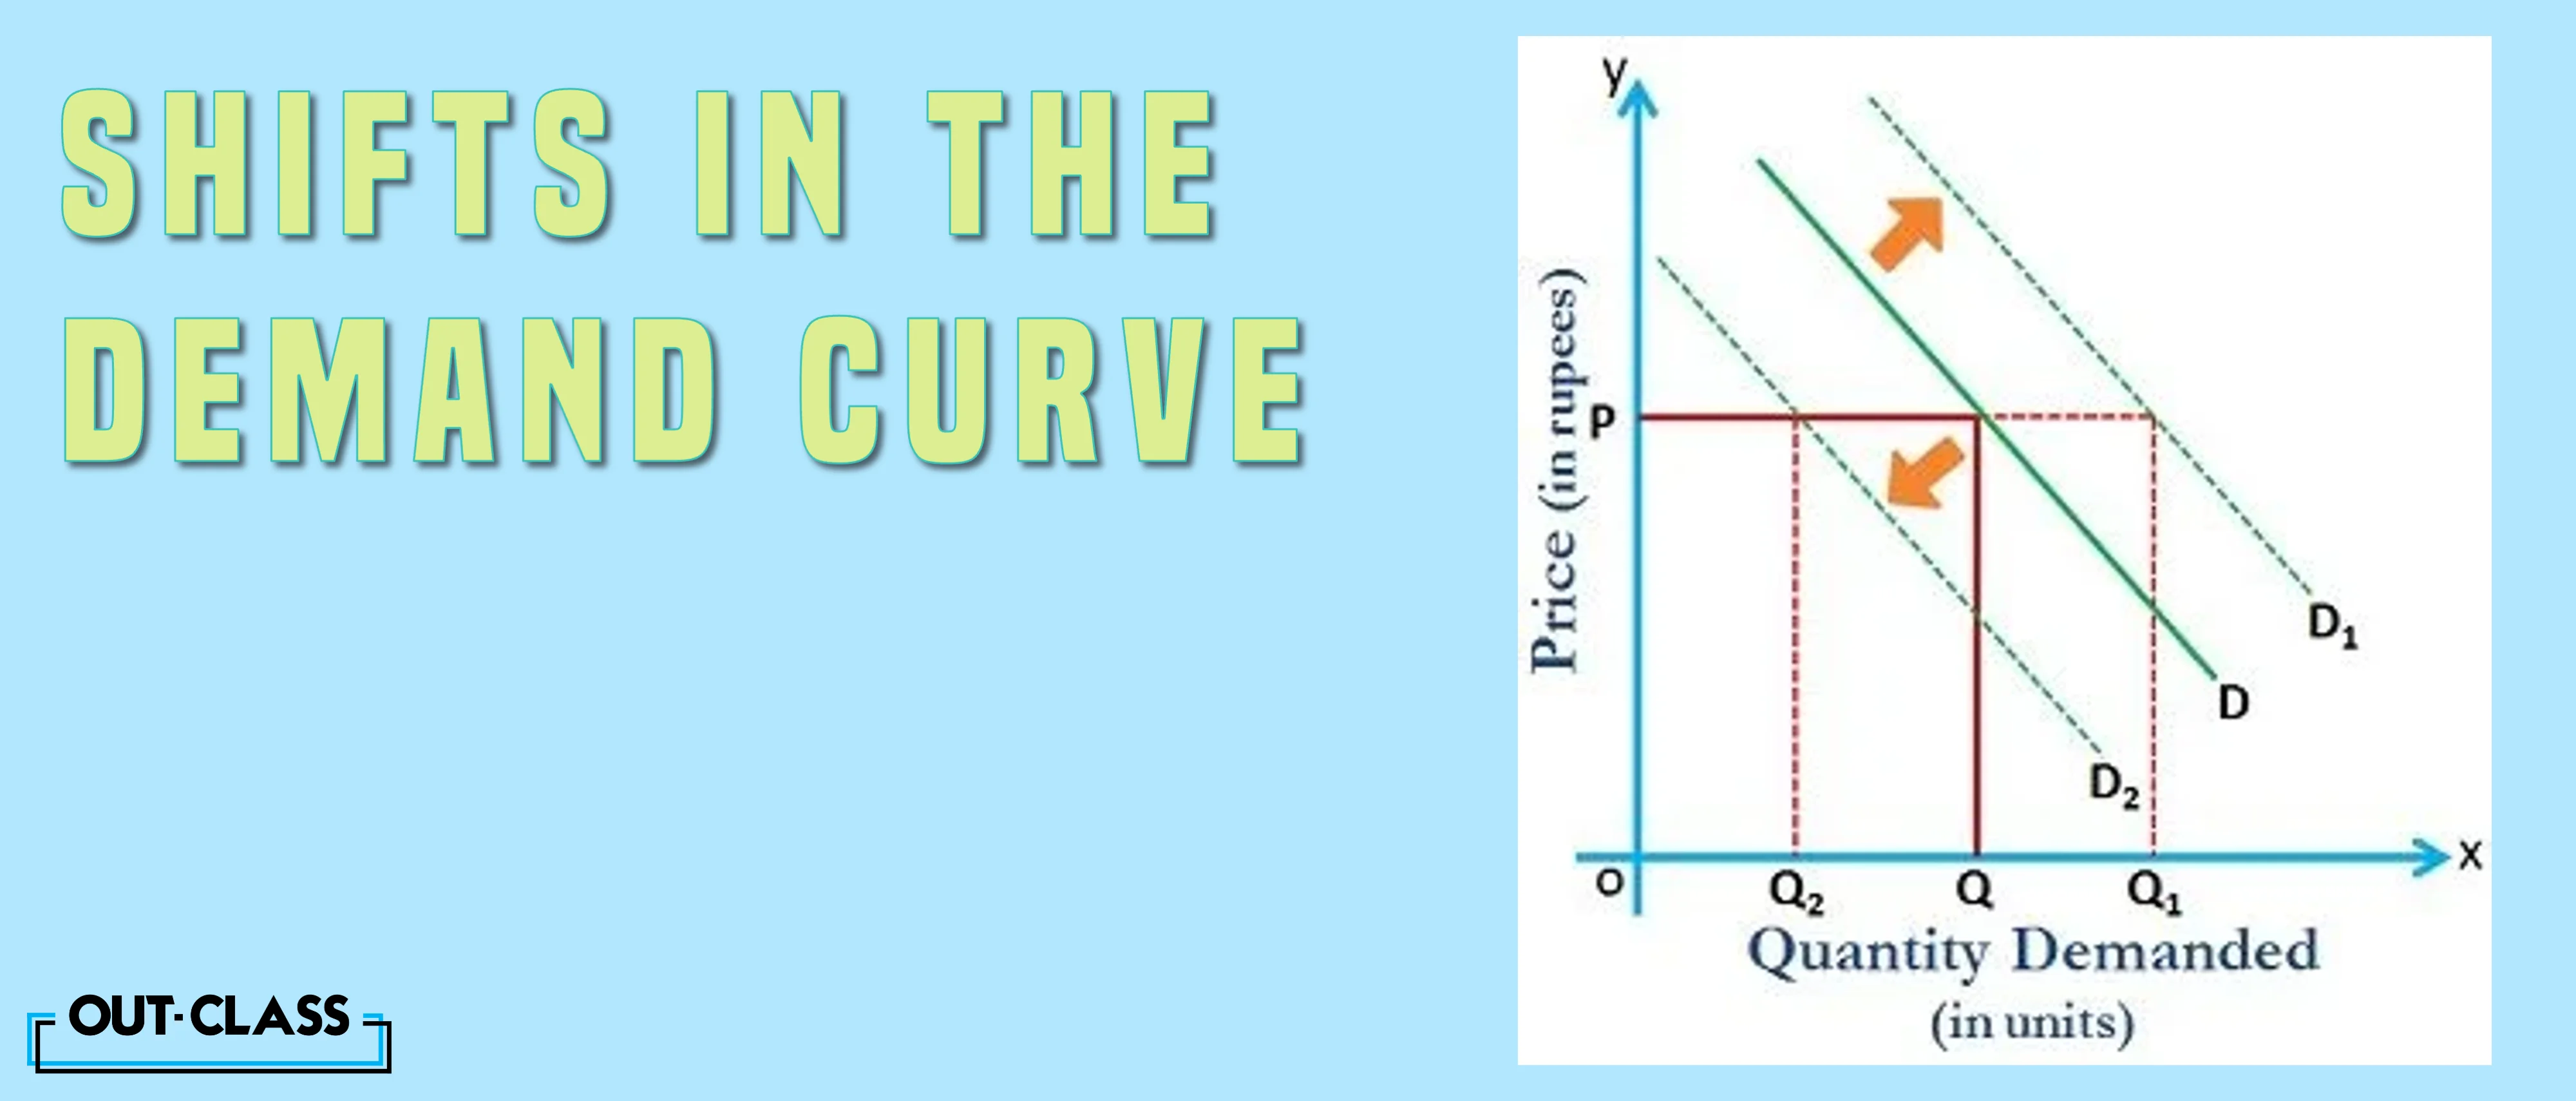 Factors affecting the demand curve and causing the demand curve to shift.